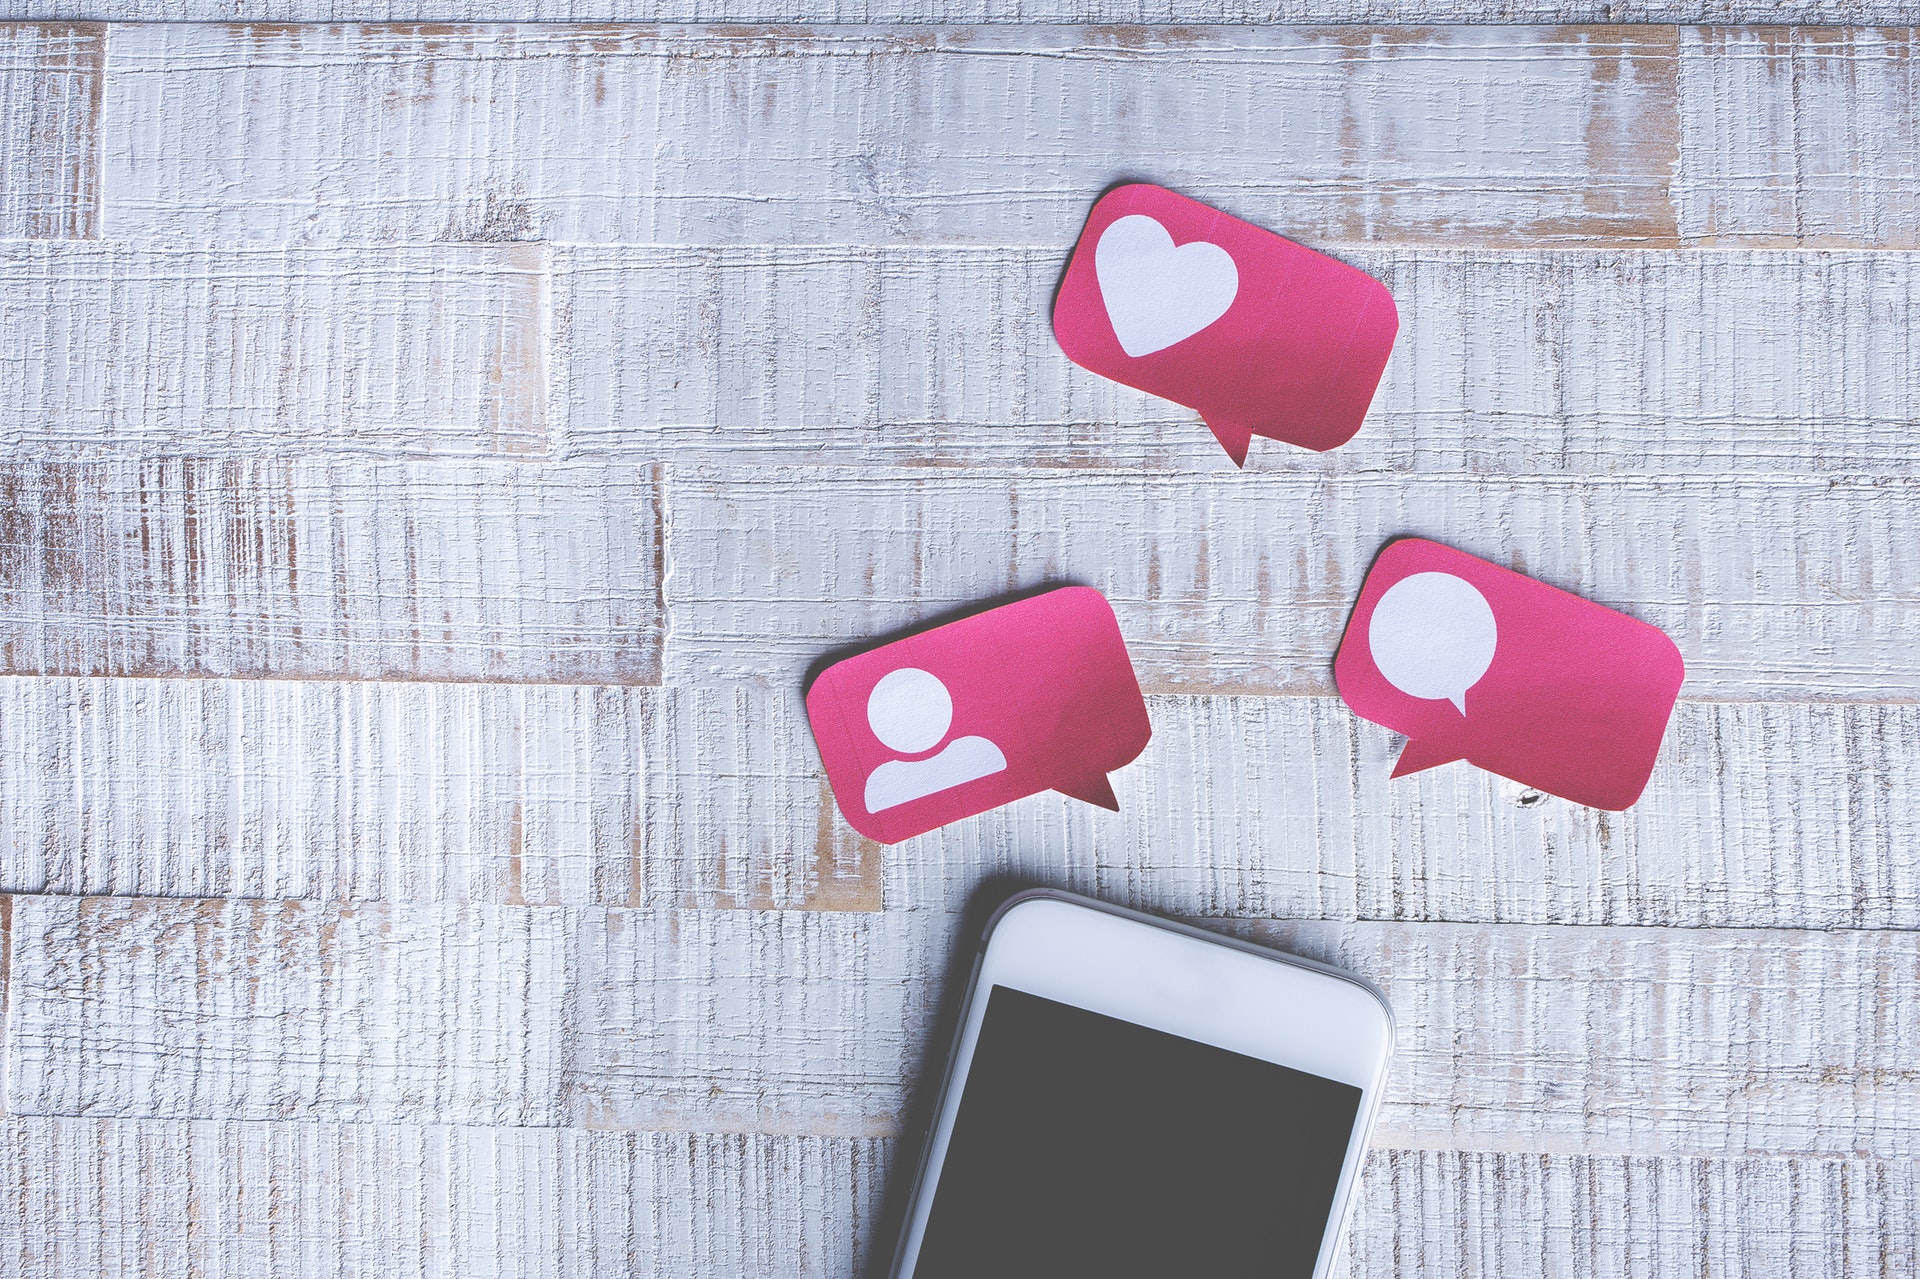 Cell phone on desk with social media likes and hearts icons